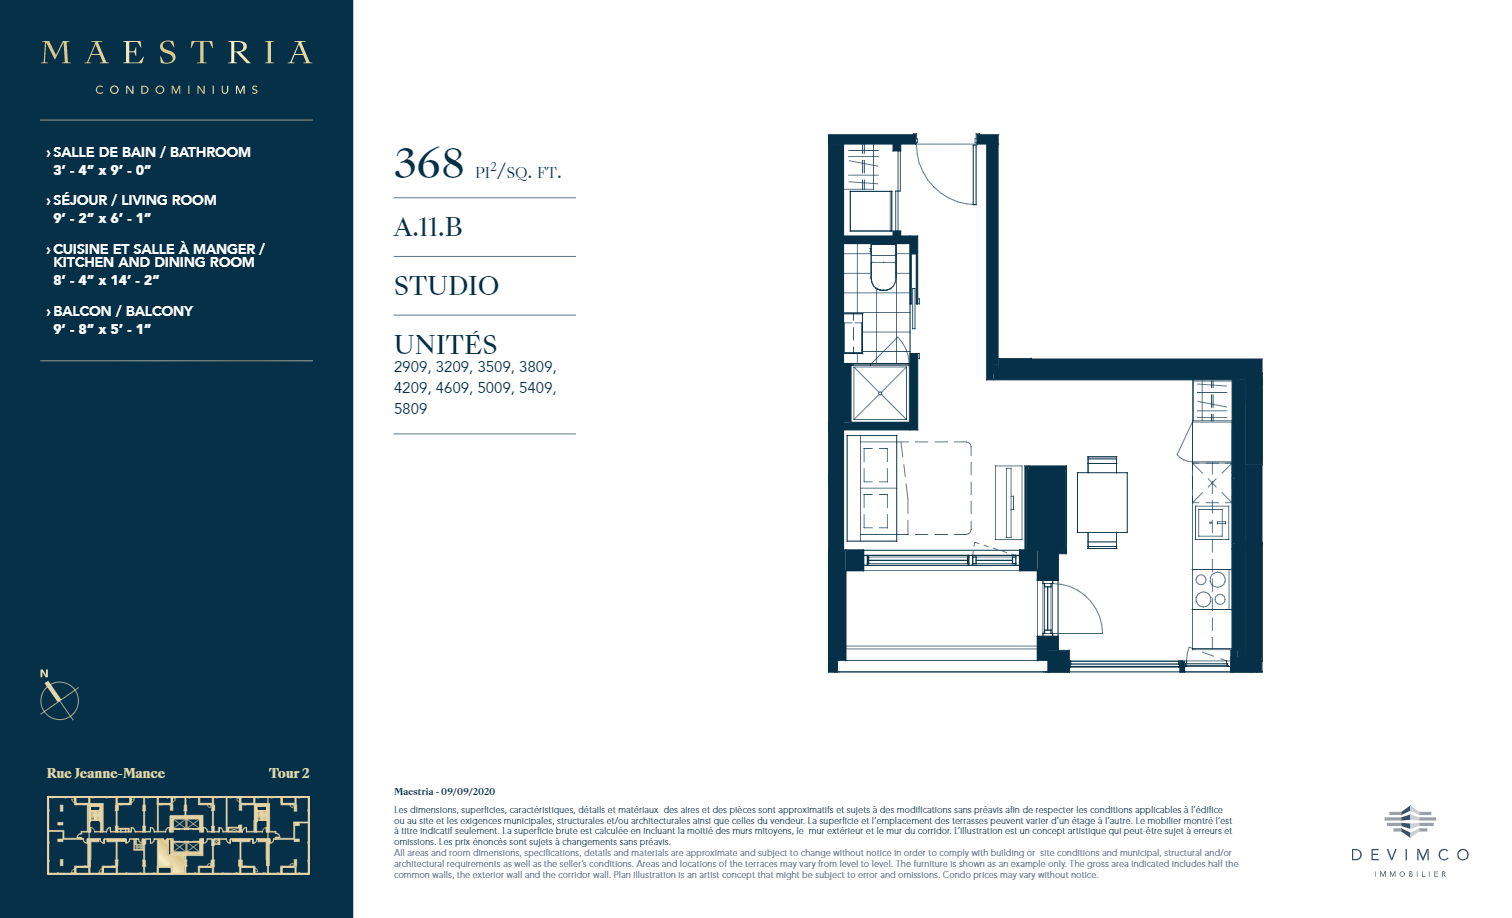  Floor Plan of Maestria Condominiums - Phase 2 with undefined beds